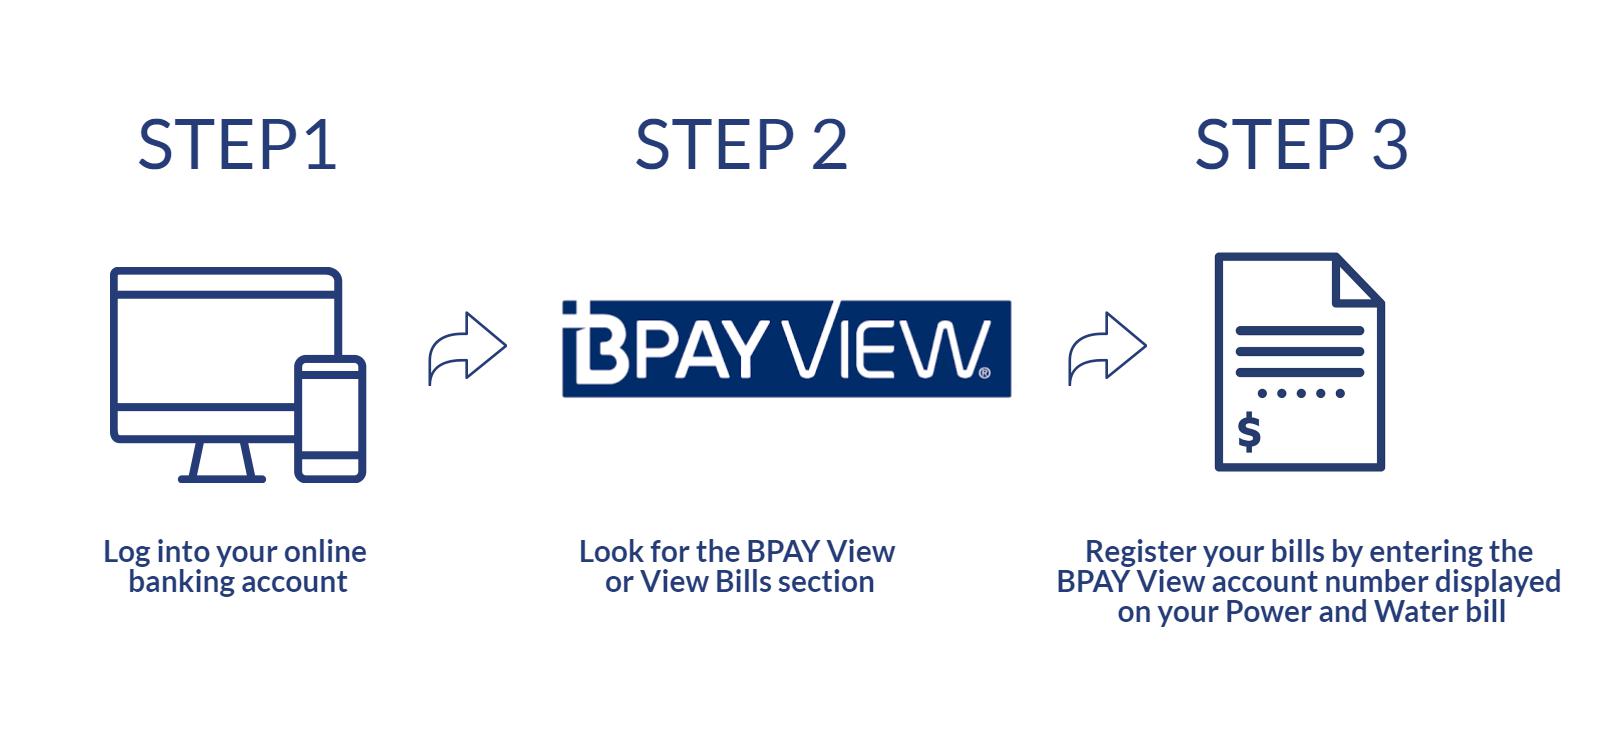 Bpay View Infographic 